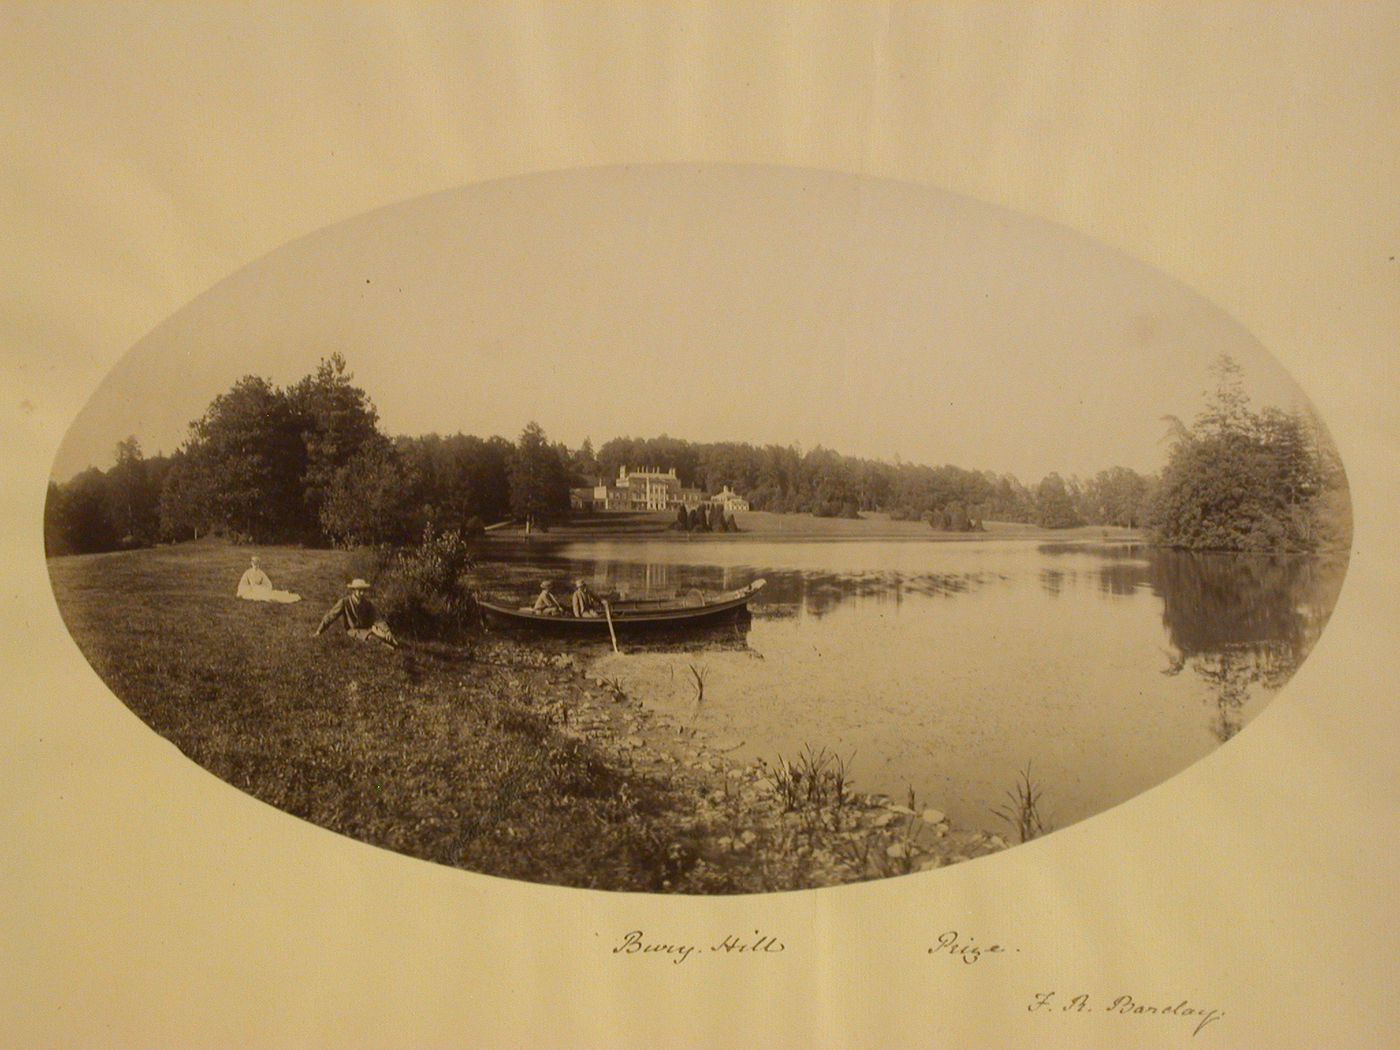 View of country estate (possibly Burry Hill House) with river and people in a small rowing boat and on the banks, house in the distance, Bury Hill, England, United Kingdom